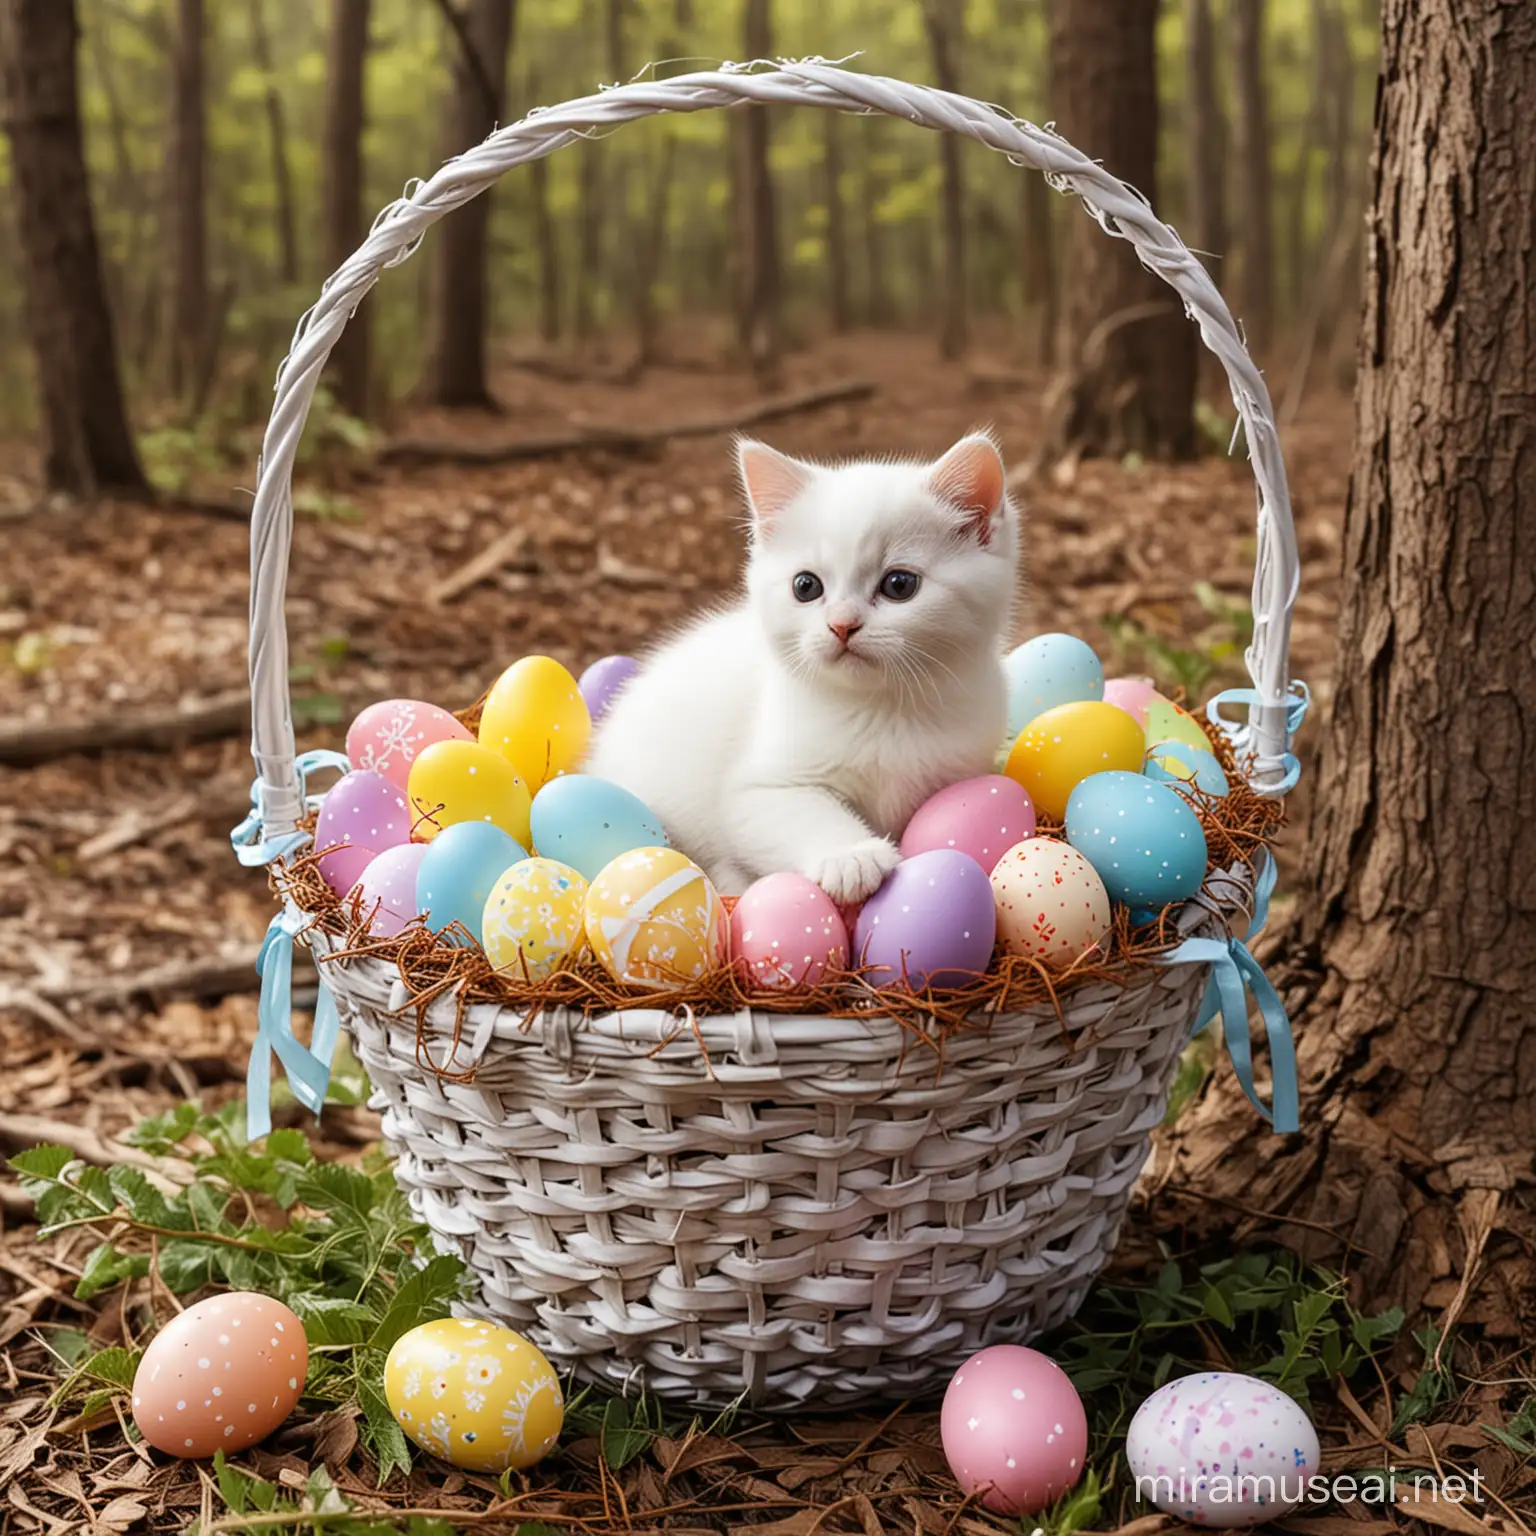 Adorable Kitten in Easter Basket Amidst Lush Woods